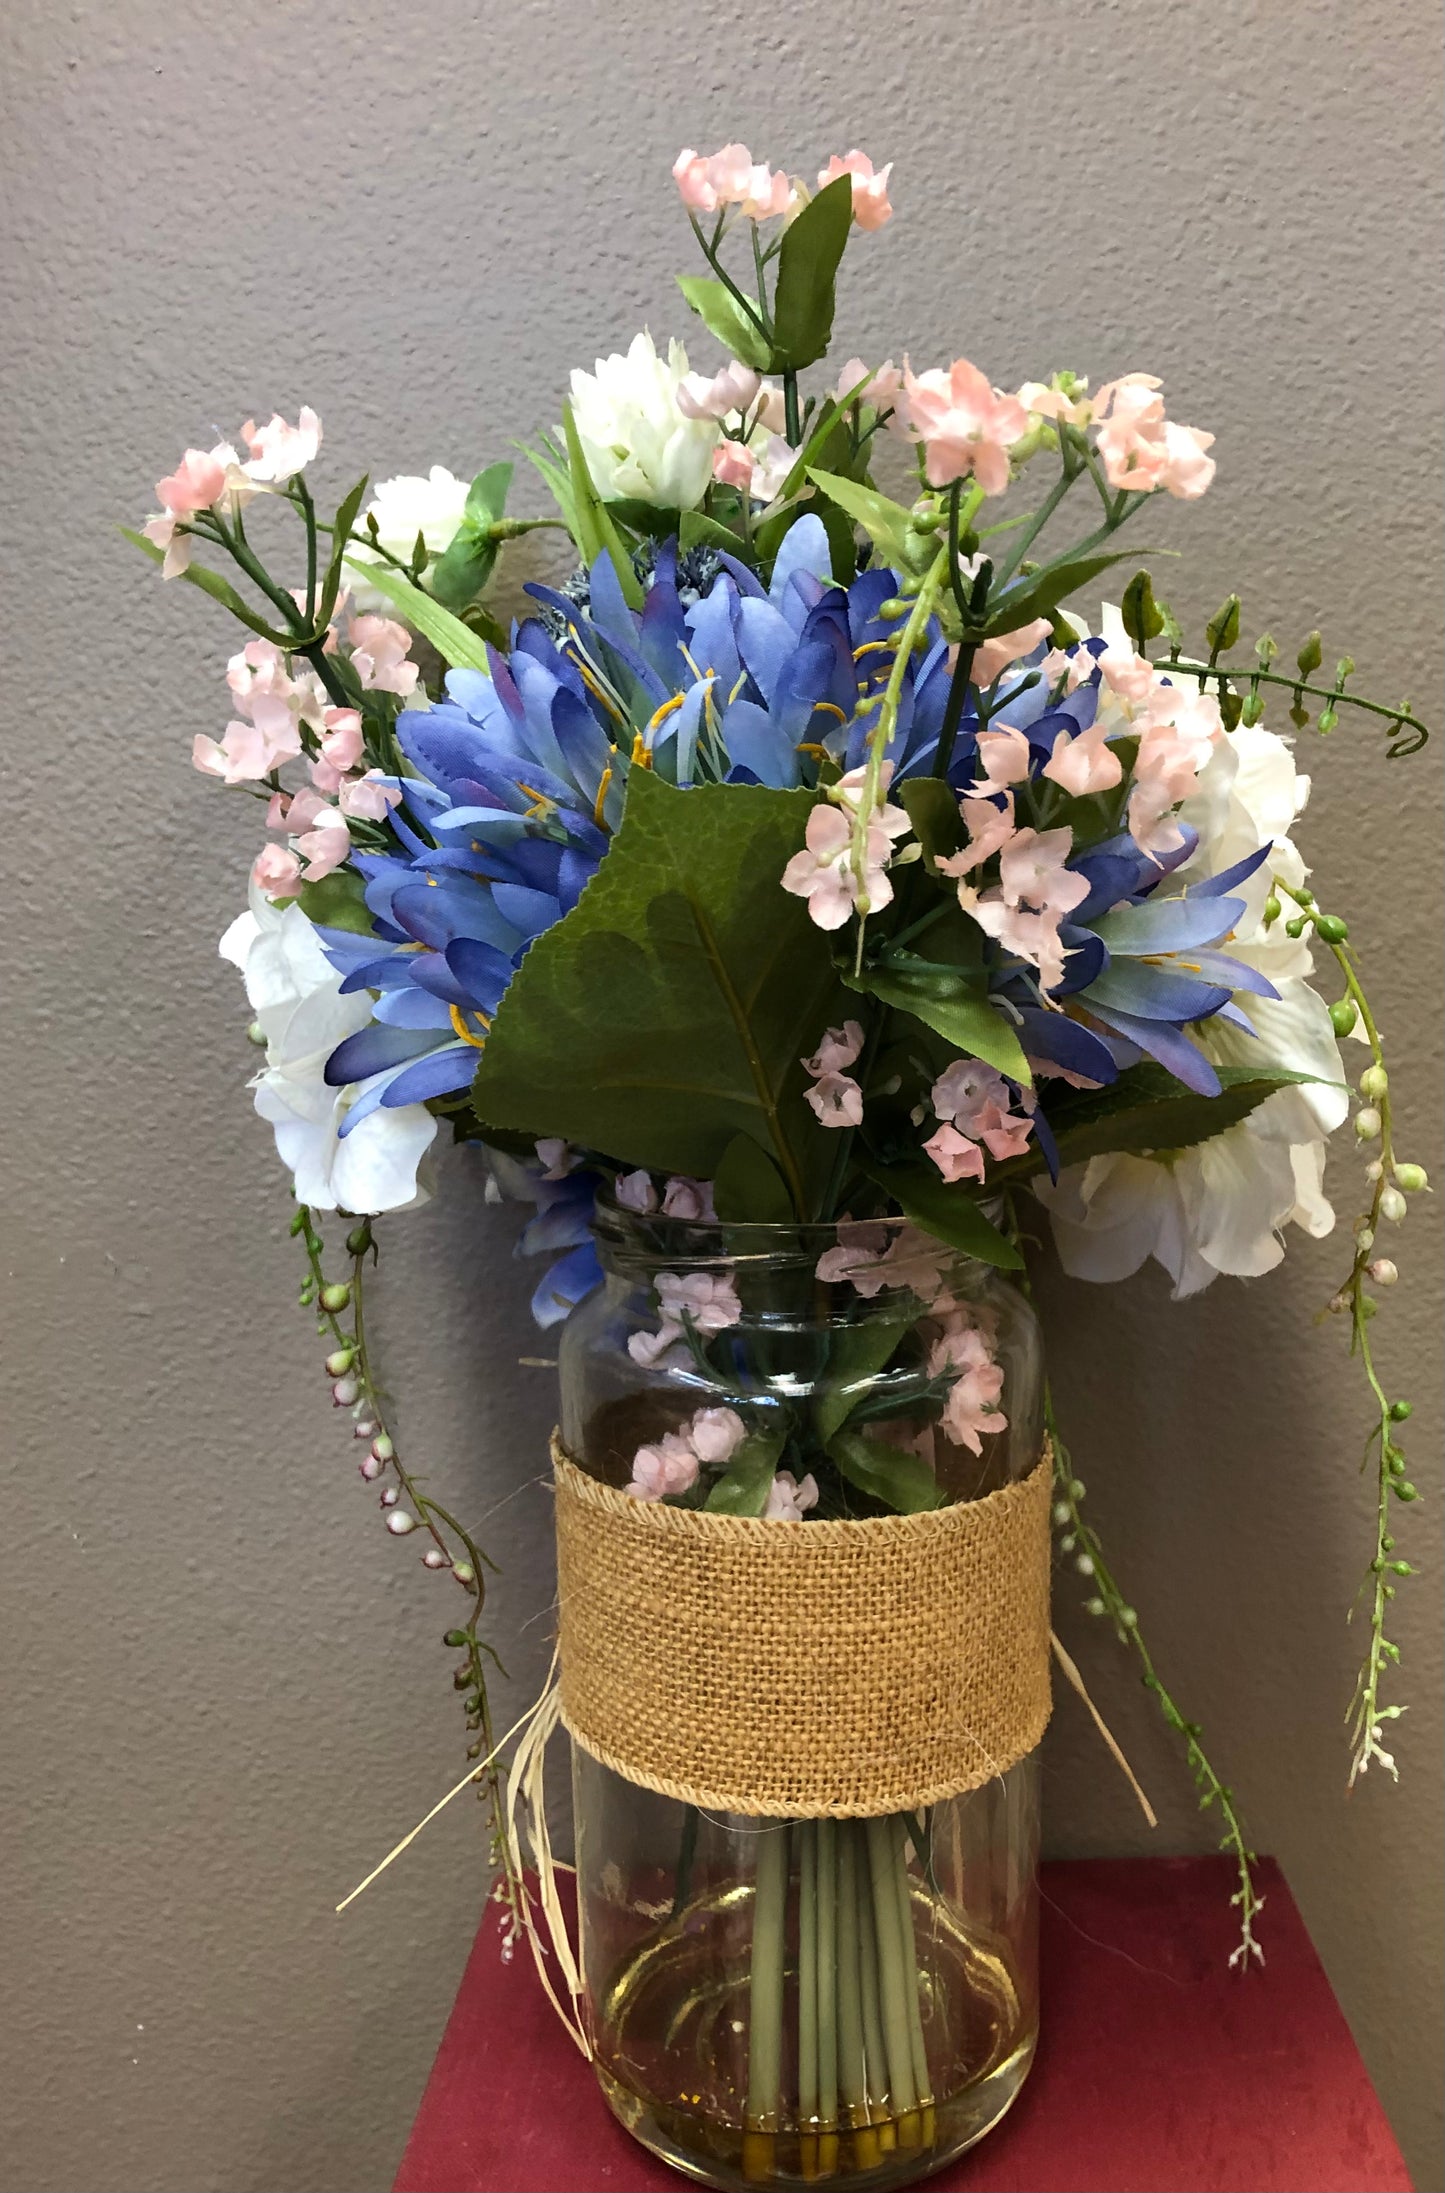 Faux spring bouquet in glass vase